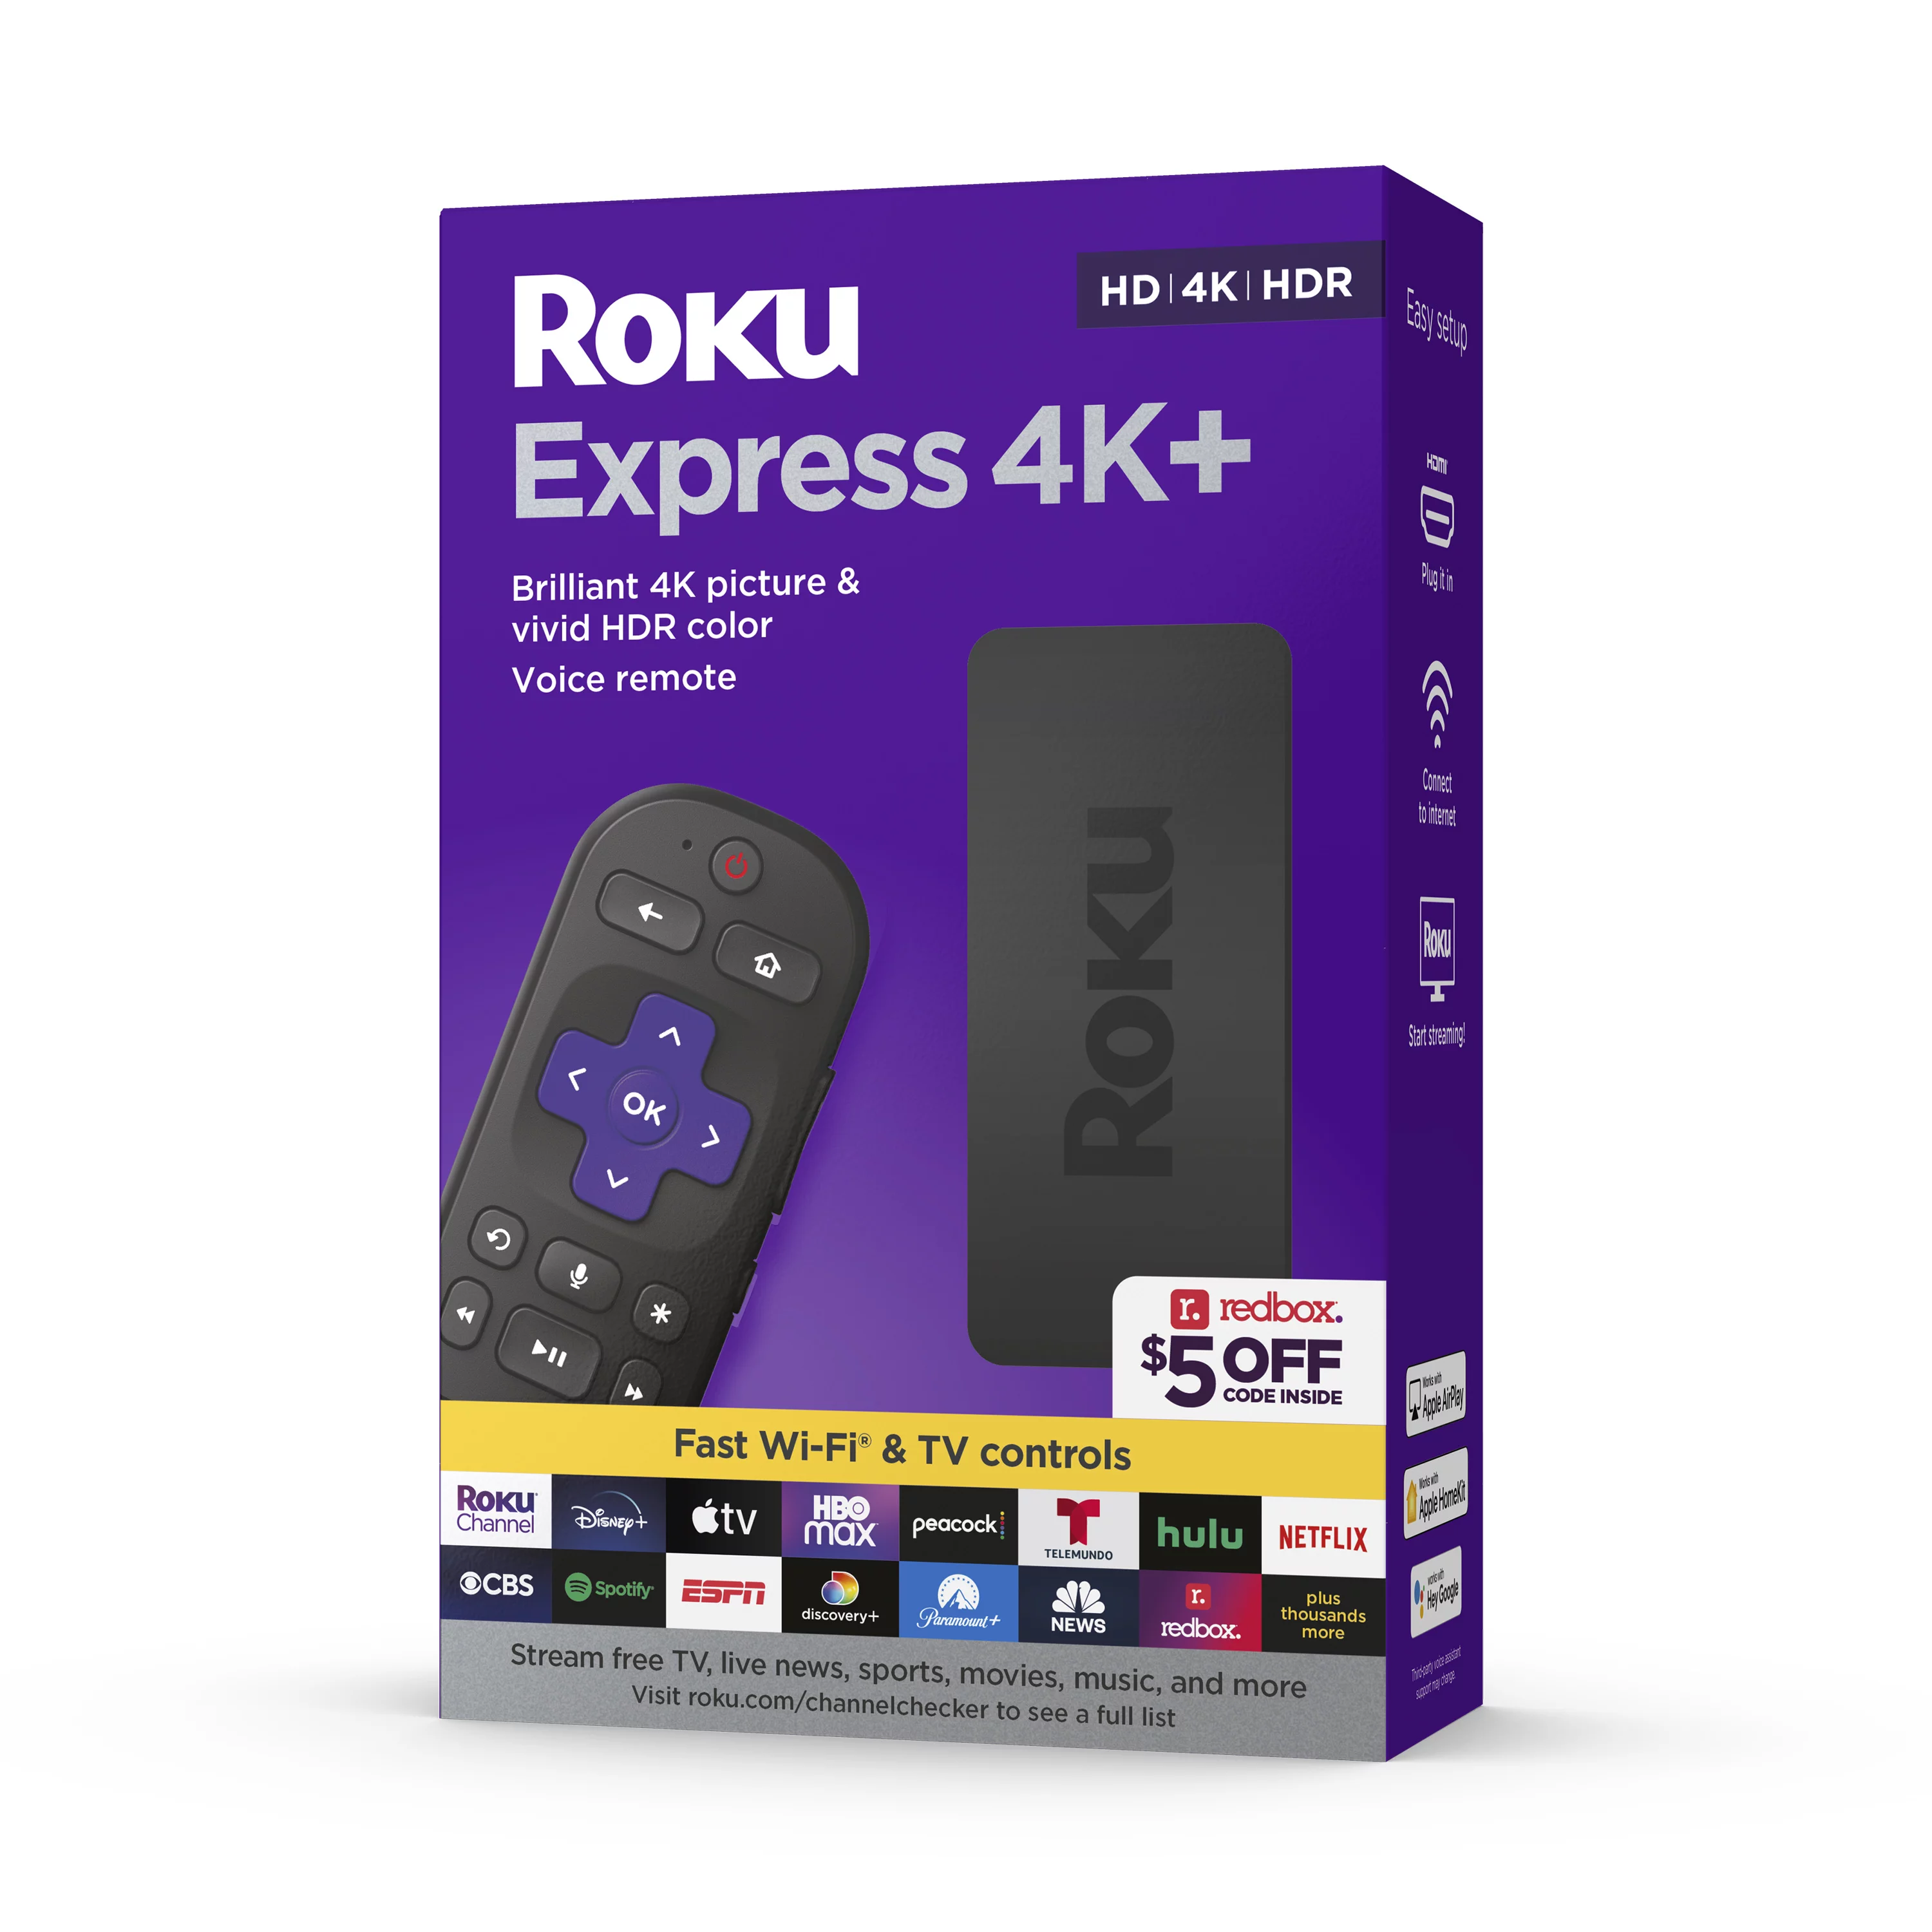 Roku Express 4K+ | Streaming Player HD/4K/HDR with Roku Voice Remote with TV Controls